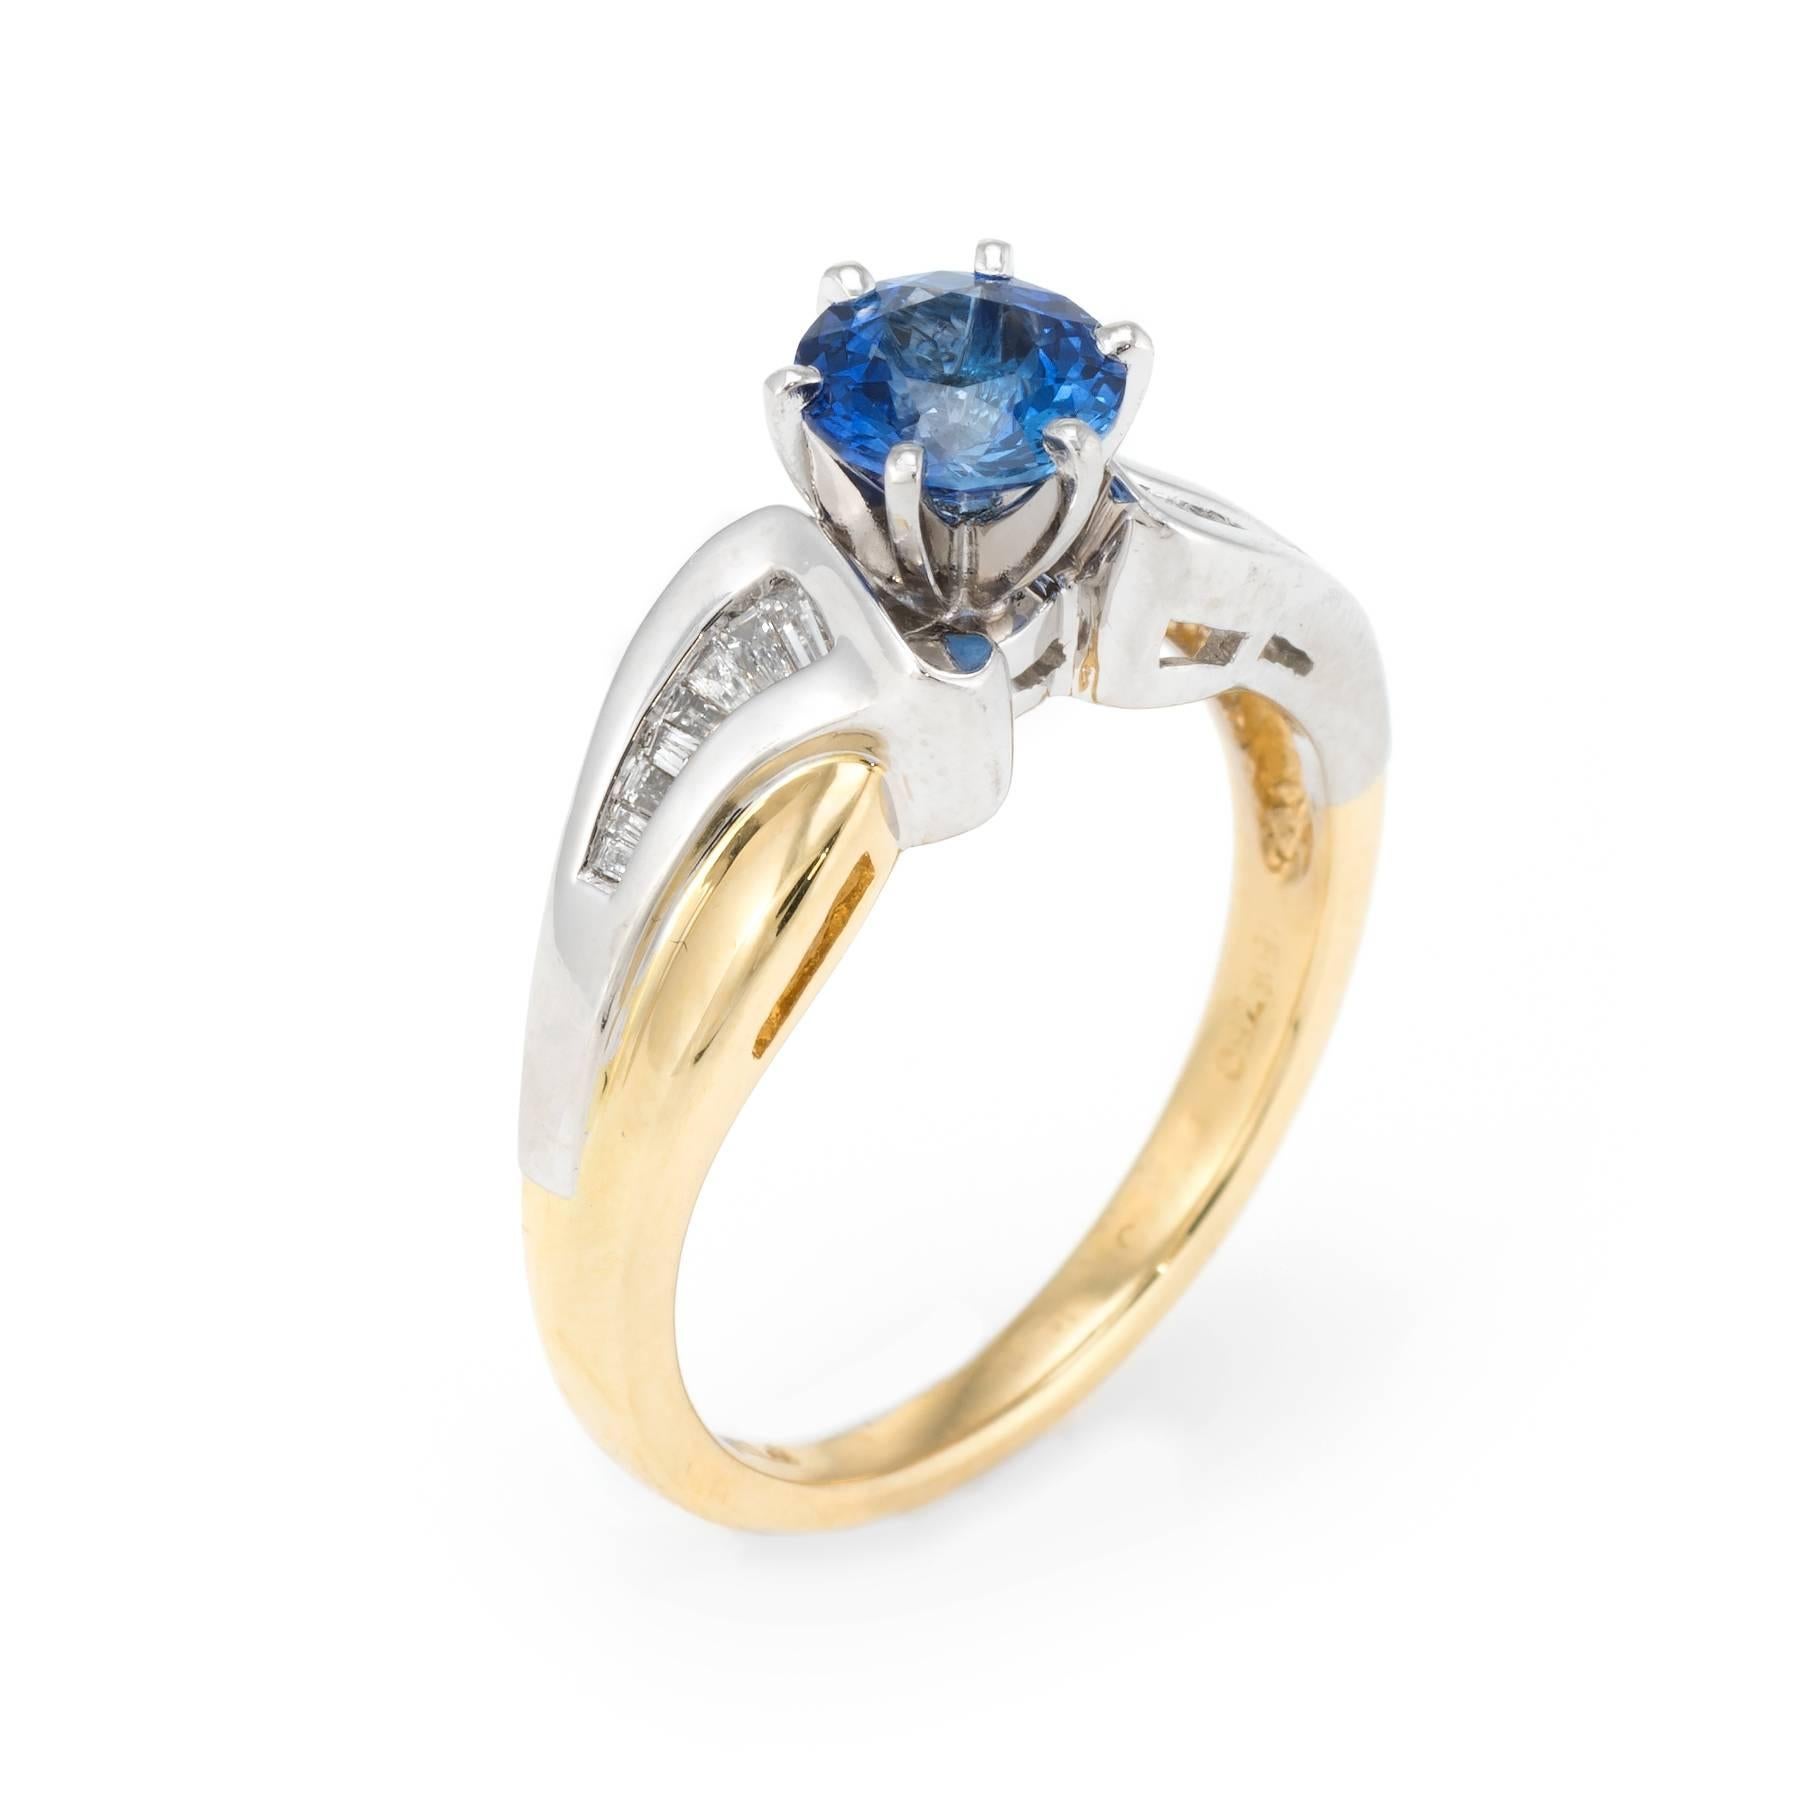 Finely detailed vintage ring, crafted in 18 karat yellow gold and 950 platinum. 

Faceted round cut sapphire measures 6mm (estimated at 0.90 carats), accented with an estimated 0.25 carats of baguette cut diamonds (estimated at G color and VS2